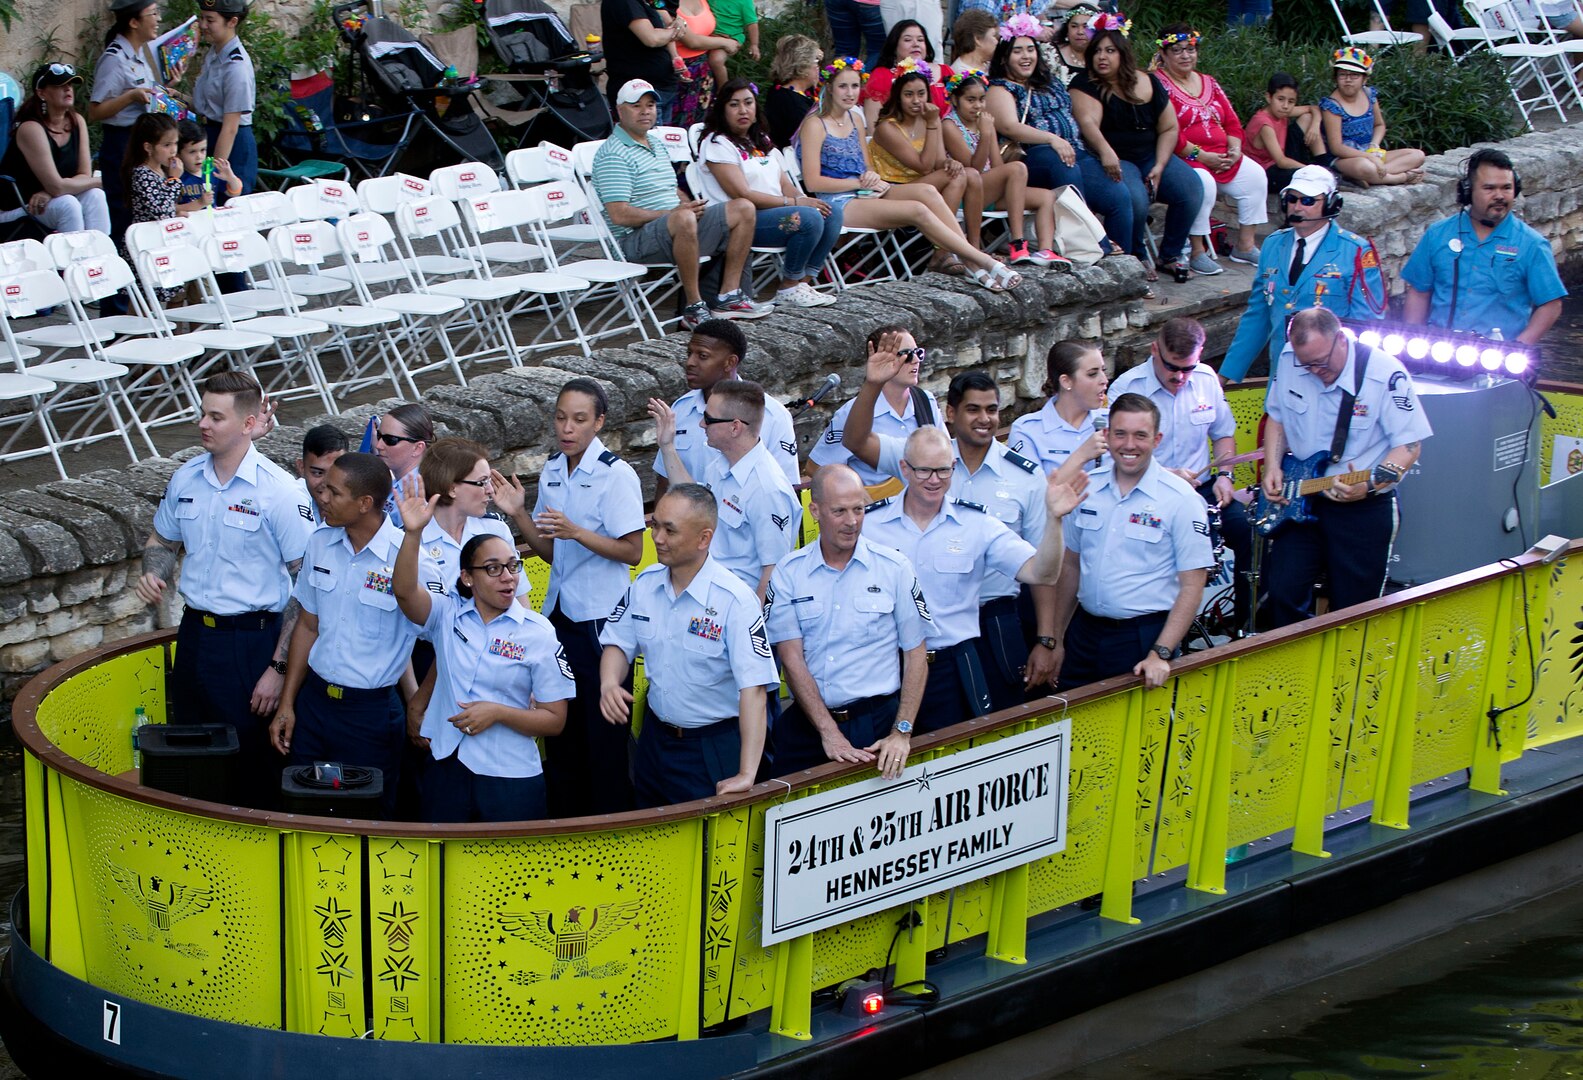 Air Forces Cyber Airmen participate in the Texas Cavaliers River Parade during 2018 Fiesta San Antonio, April 23. Fiesta San Antonio is held annually to honor those who lost their lives at the Alamo and Battle of San Jacinto. (U.S. Air Force photo by Tech. Sgt. R.J. Biermann)